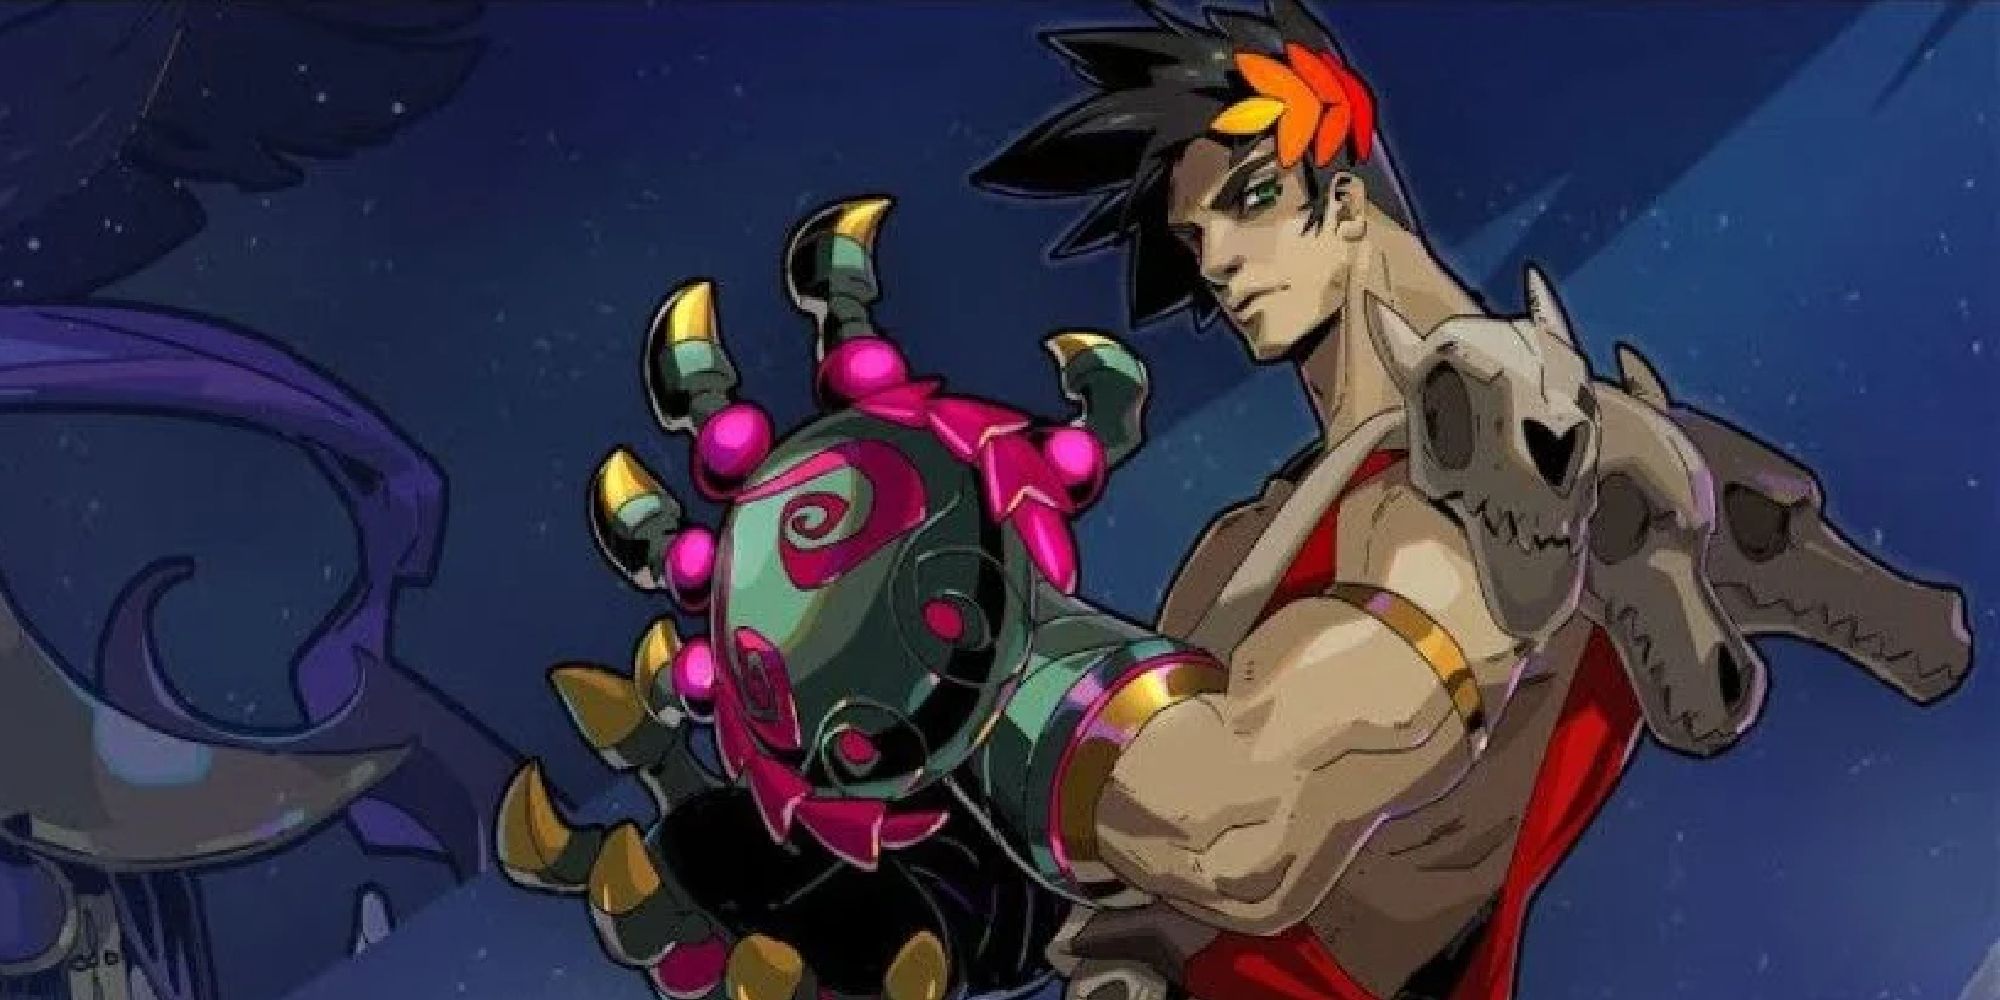 Zagreus wielding the Twin Fists of Malphon in promotional art for Hades